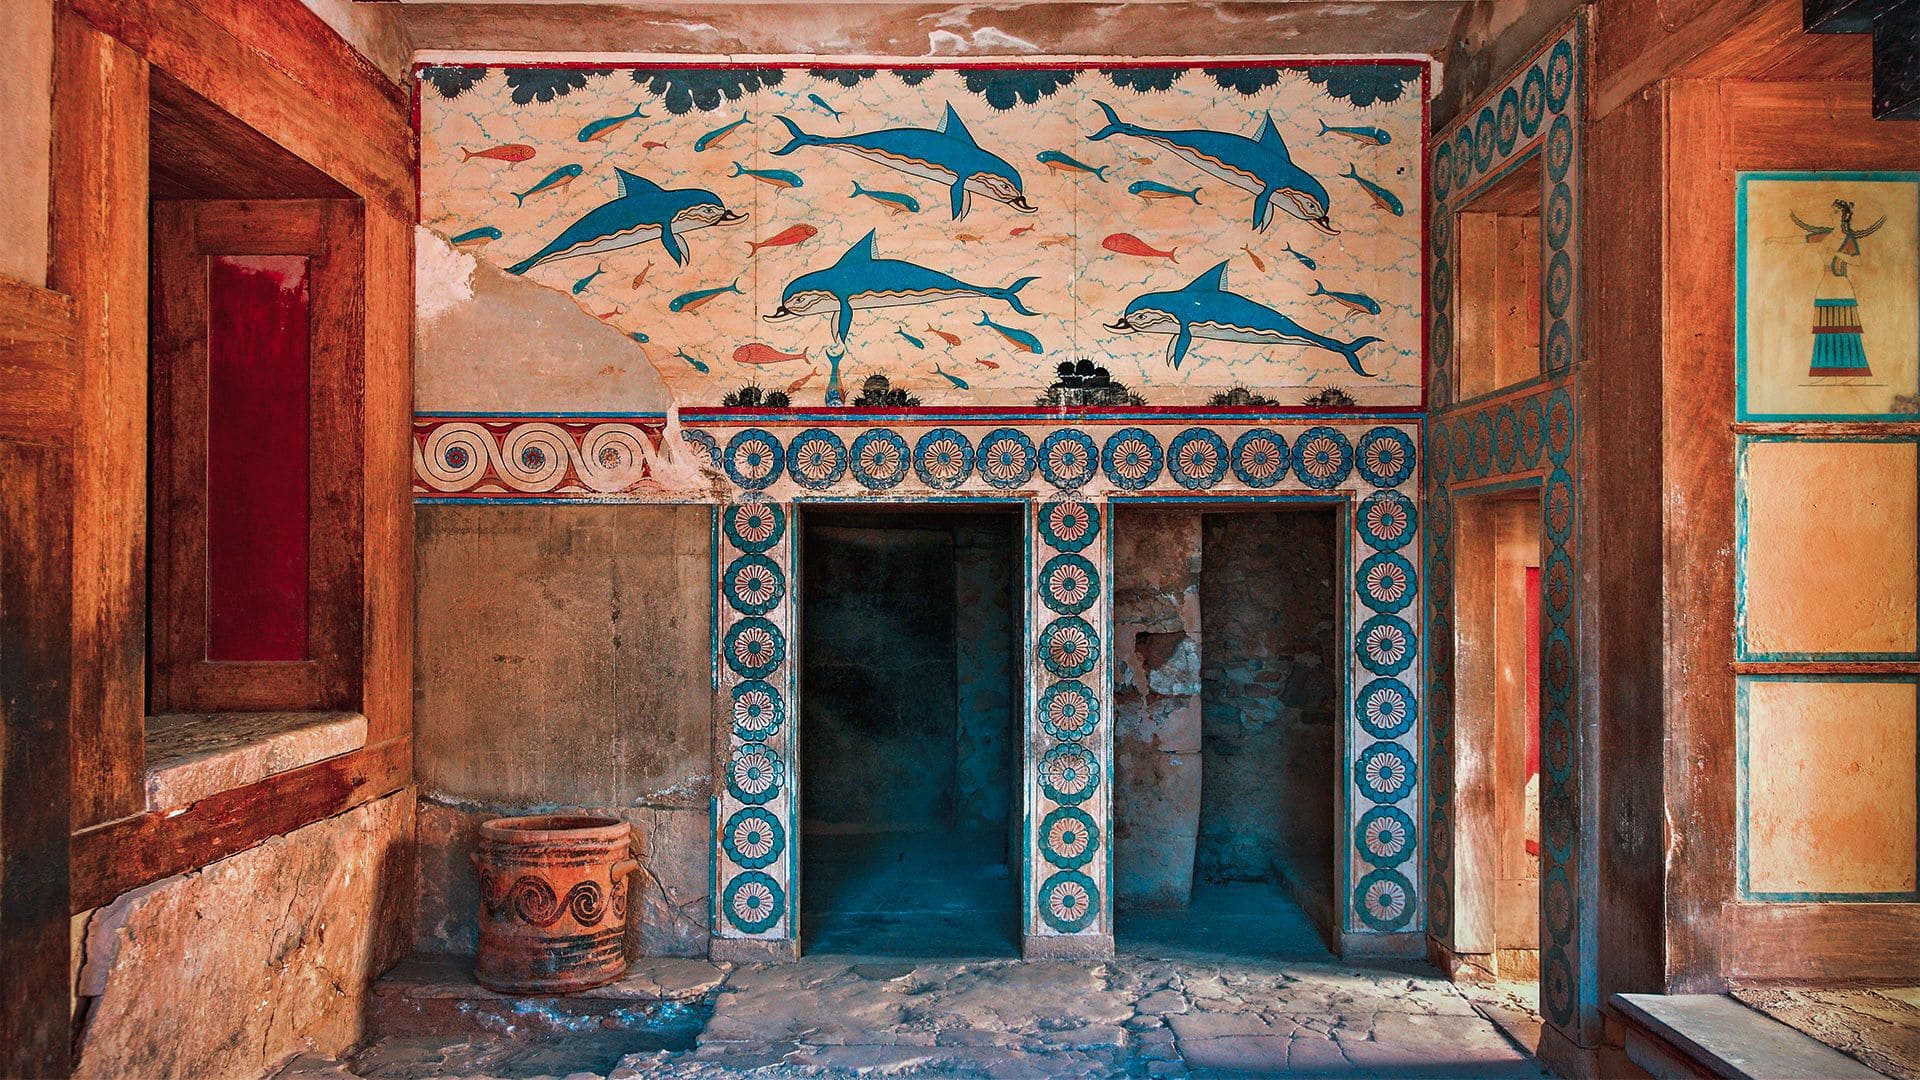 Knossos Palace and the Museum of Heraklion